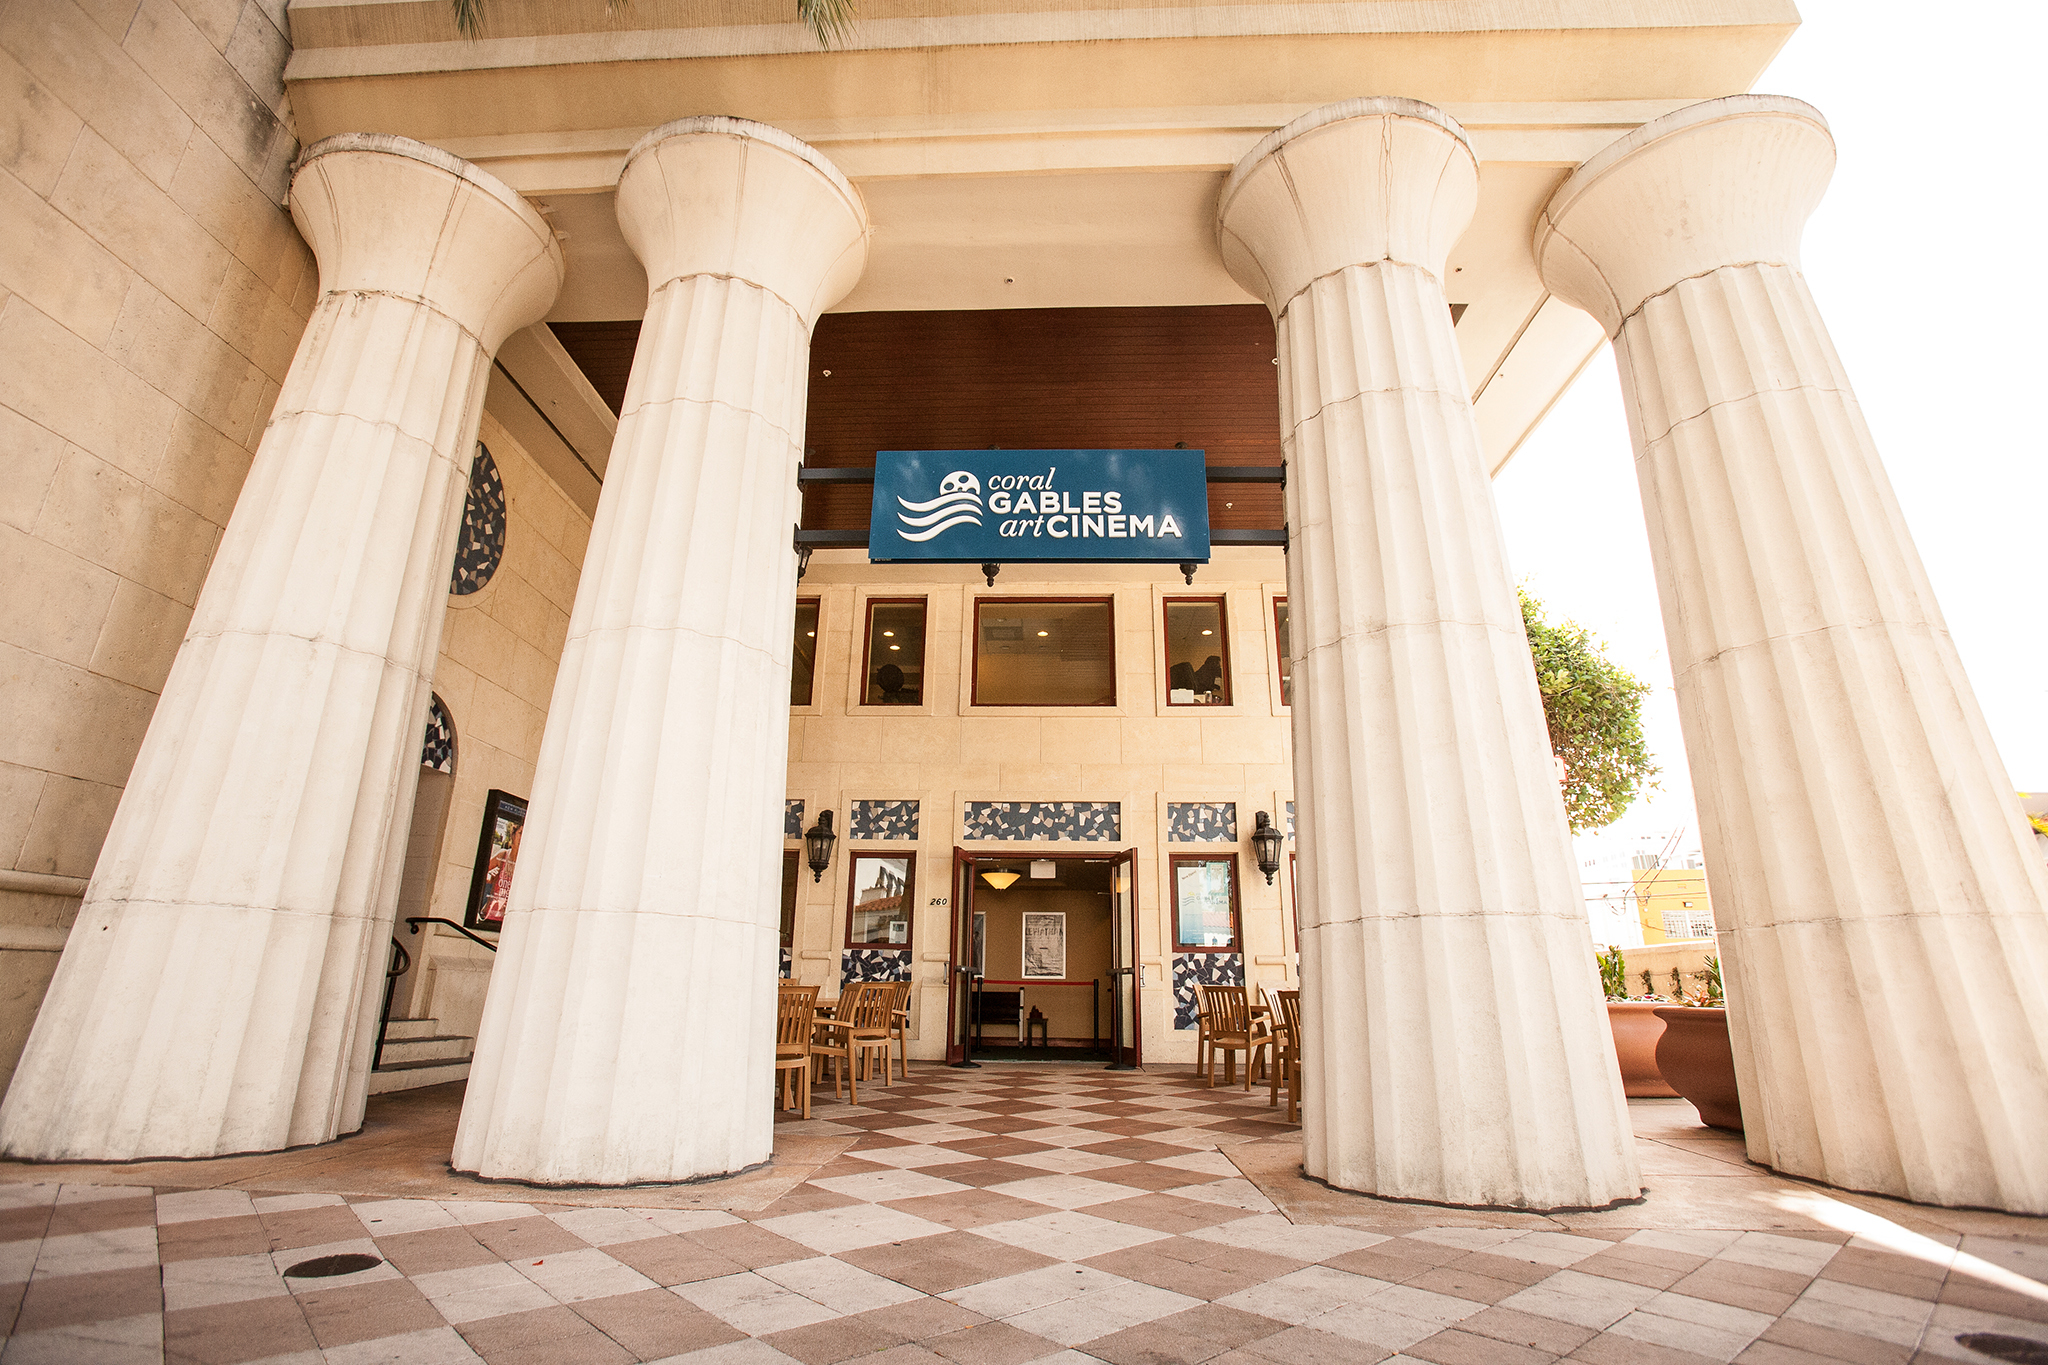 Coral Gables Art Cinema | Movie theaters in Coral Gables, Miami